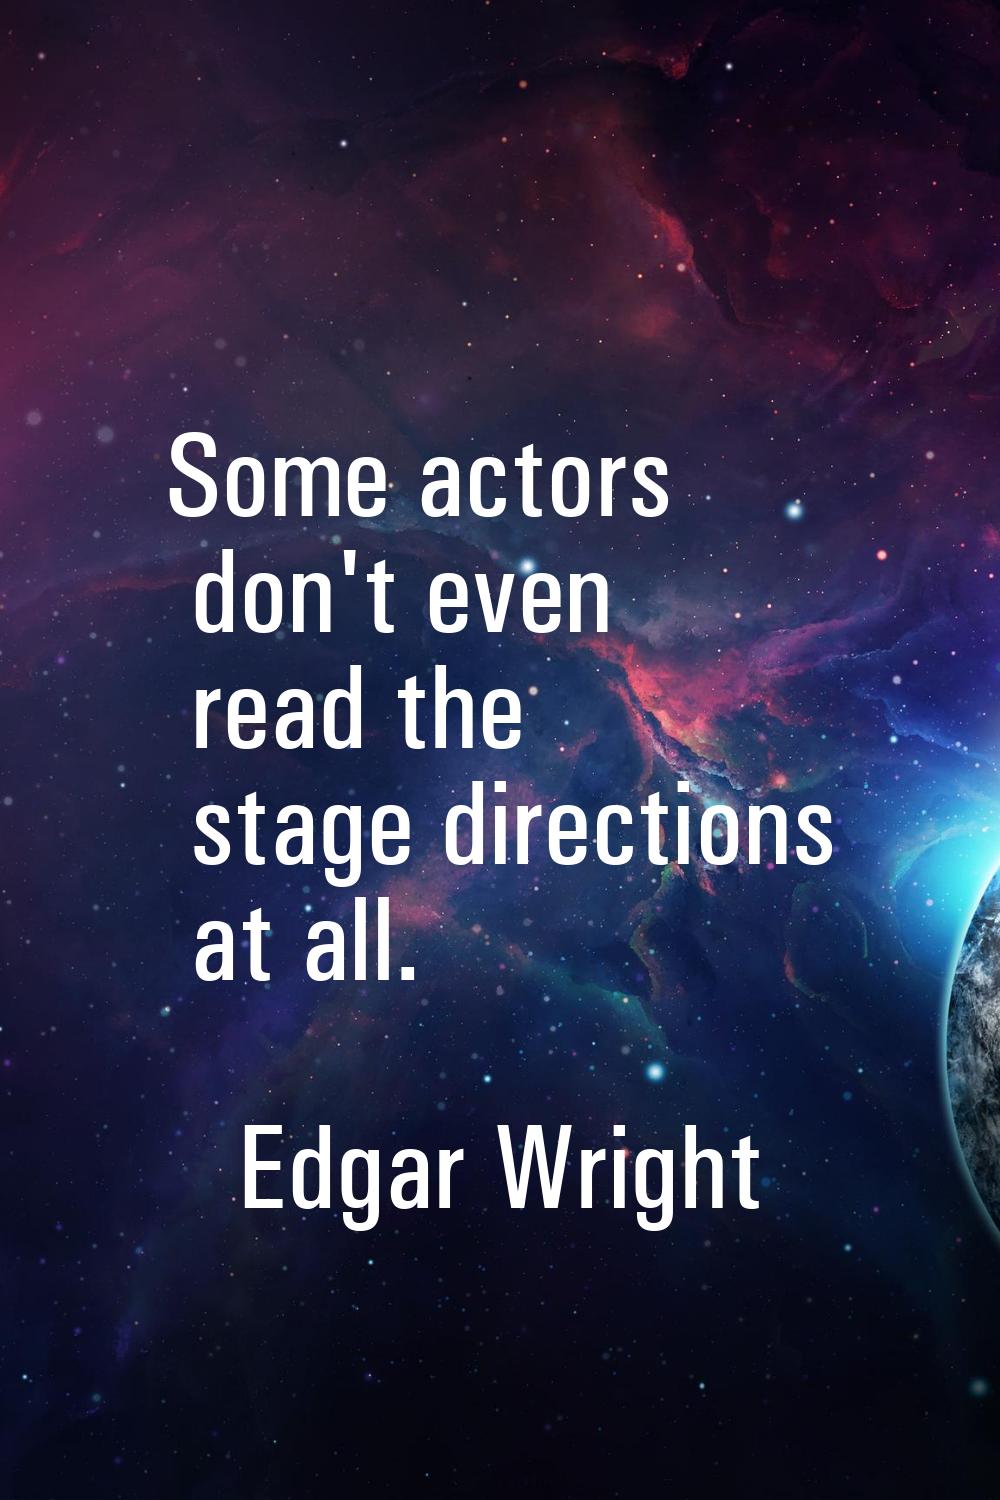 Some actors don't even read the stage directions at all.